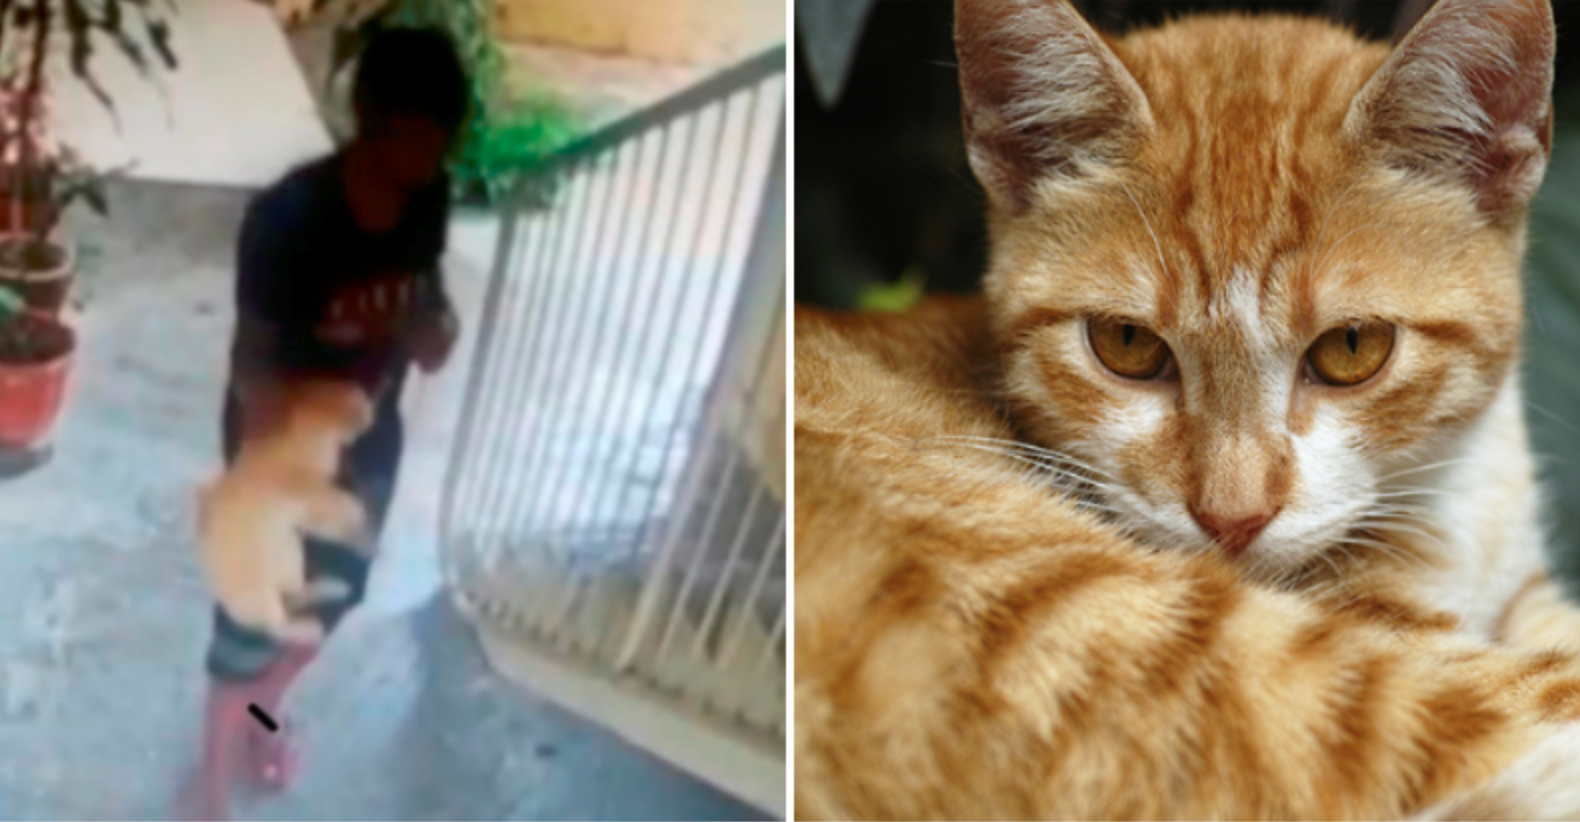 Man Who Hung Cat Sentenced to 15 Months of Jail, Pleads for Lighter Sentence Because "He's an Orphan" - WORLD OF BUZZ 3